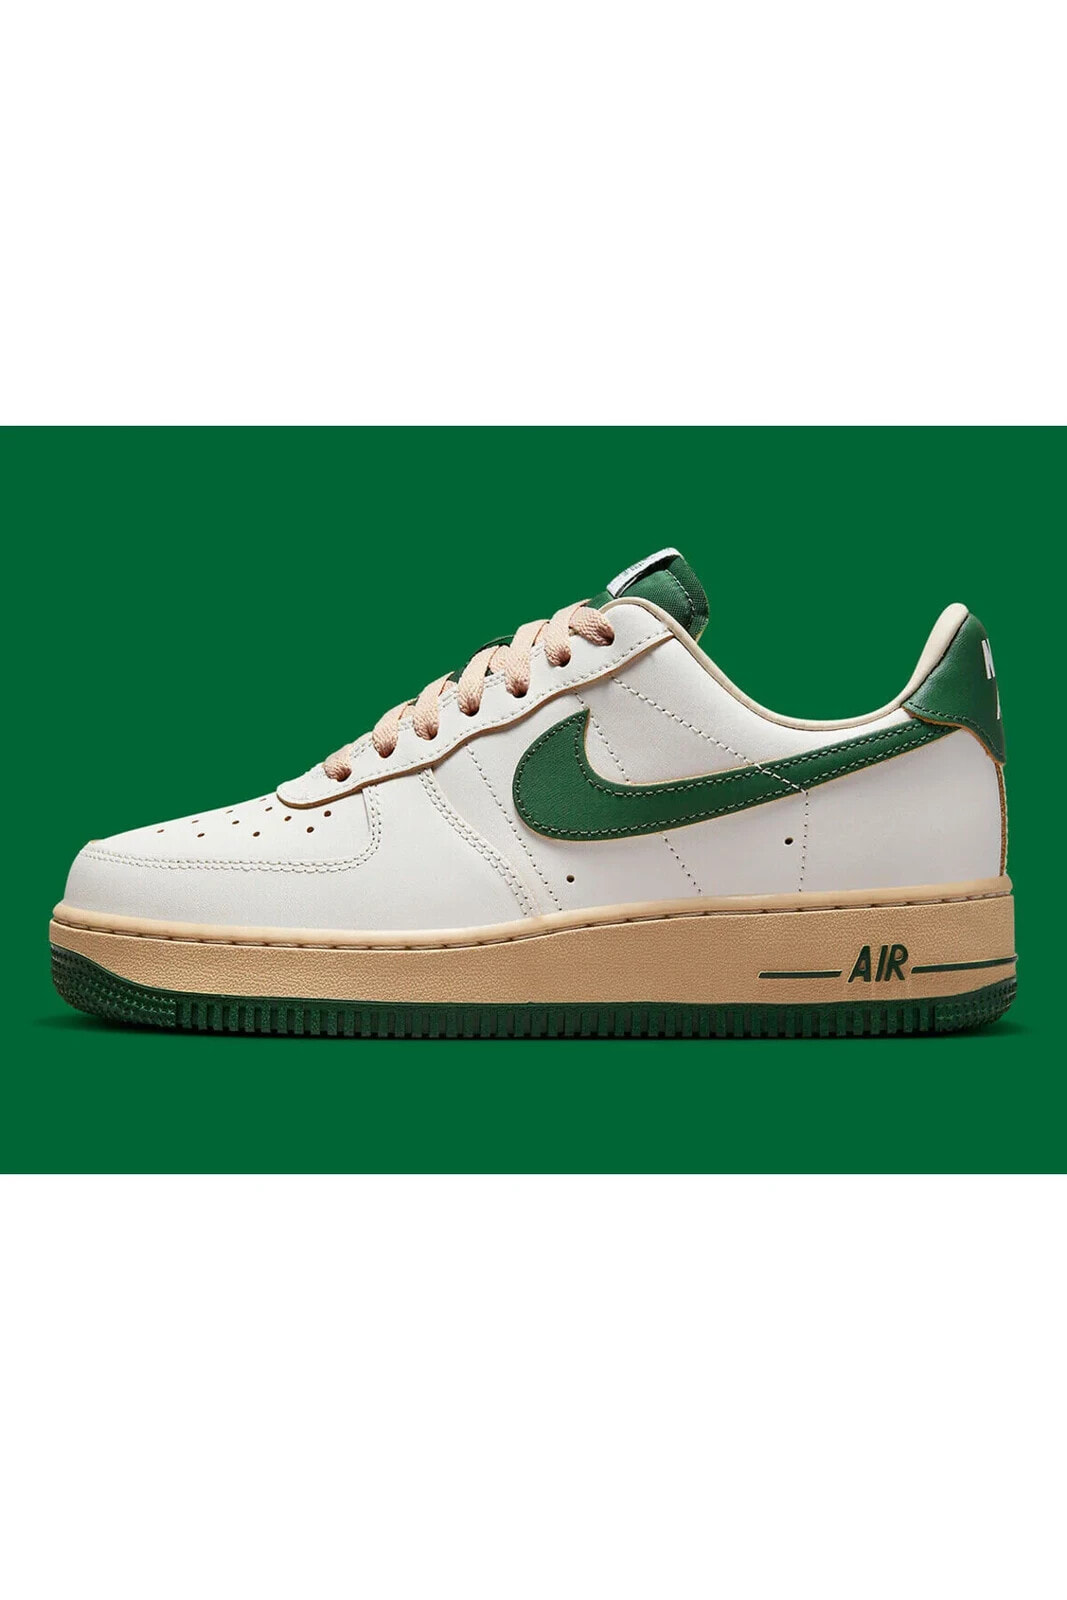 Air Force 1 '07 Low Vintage Sail Gorge Green White